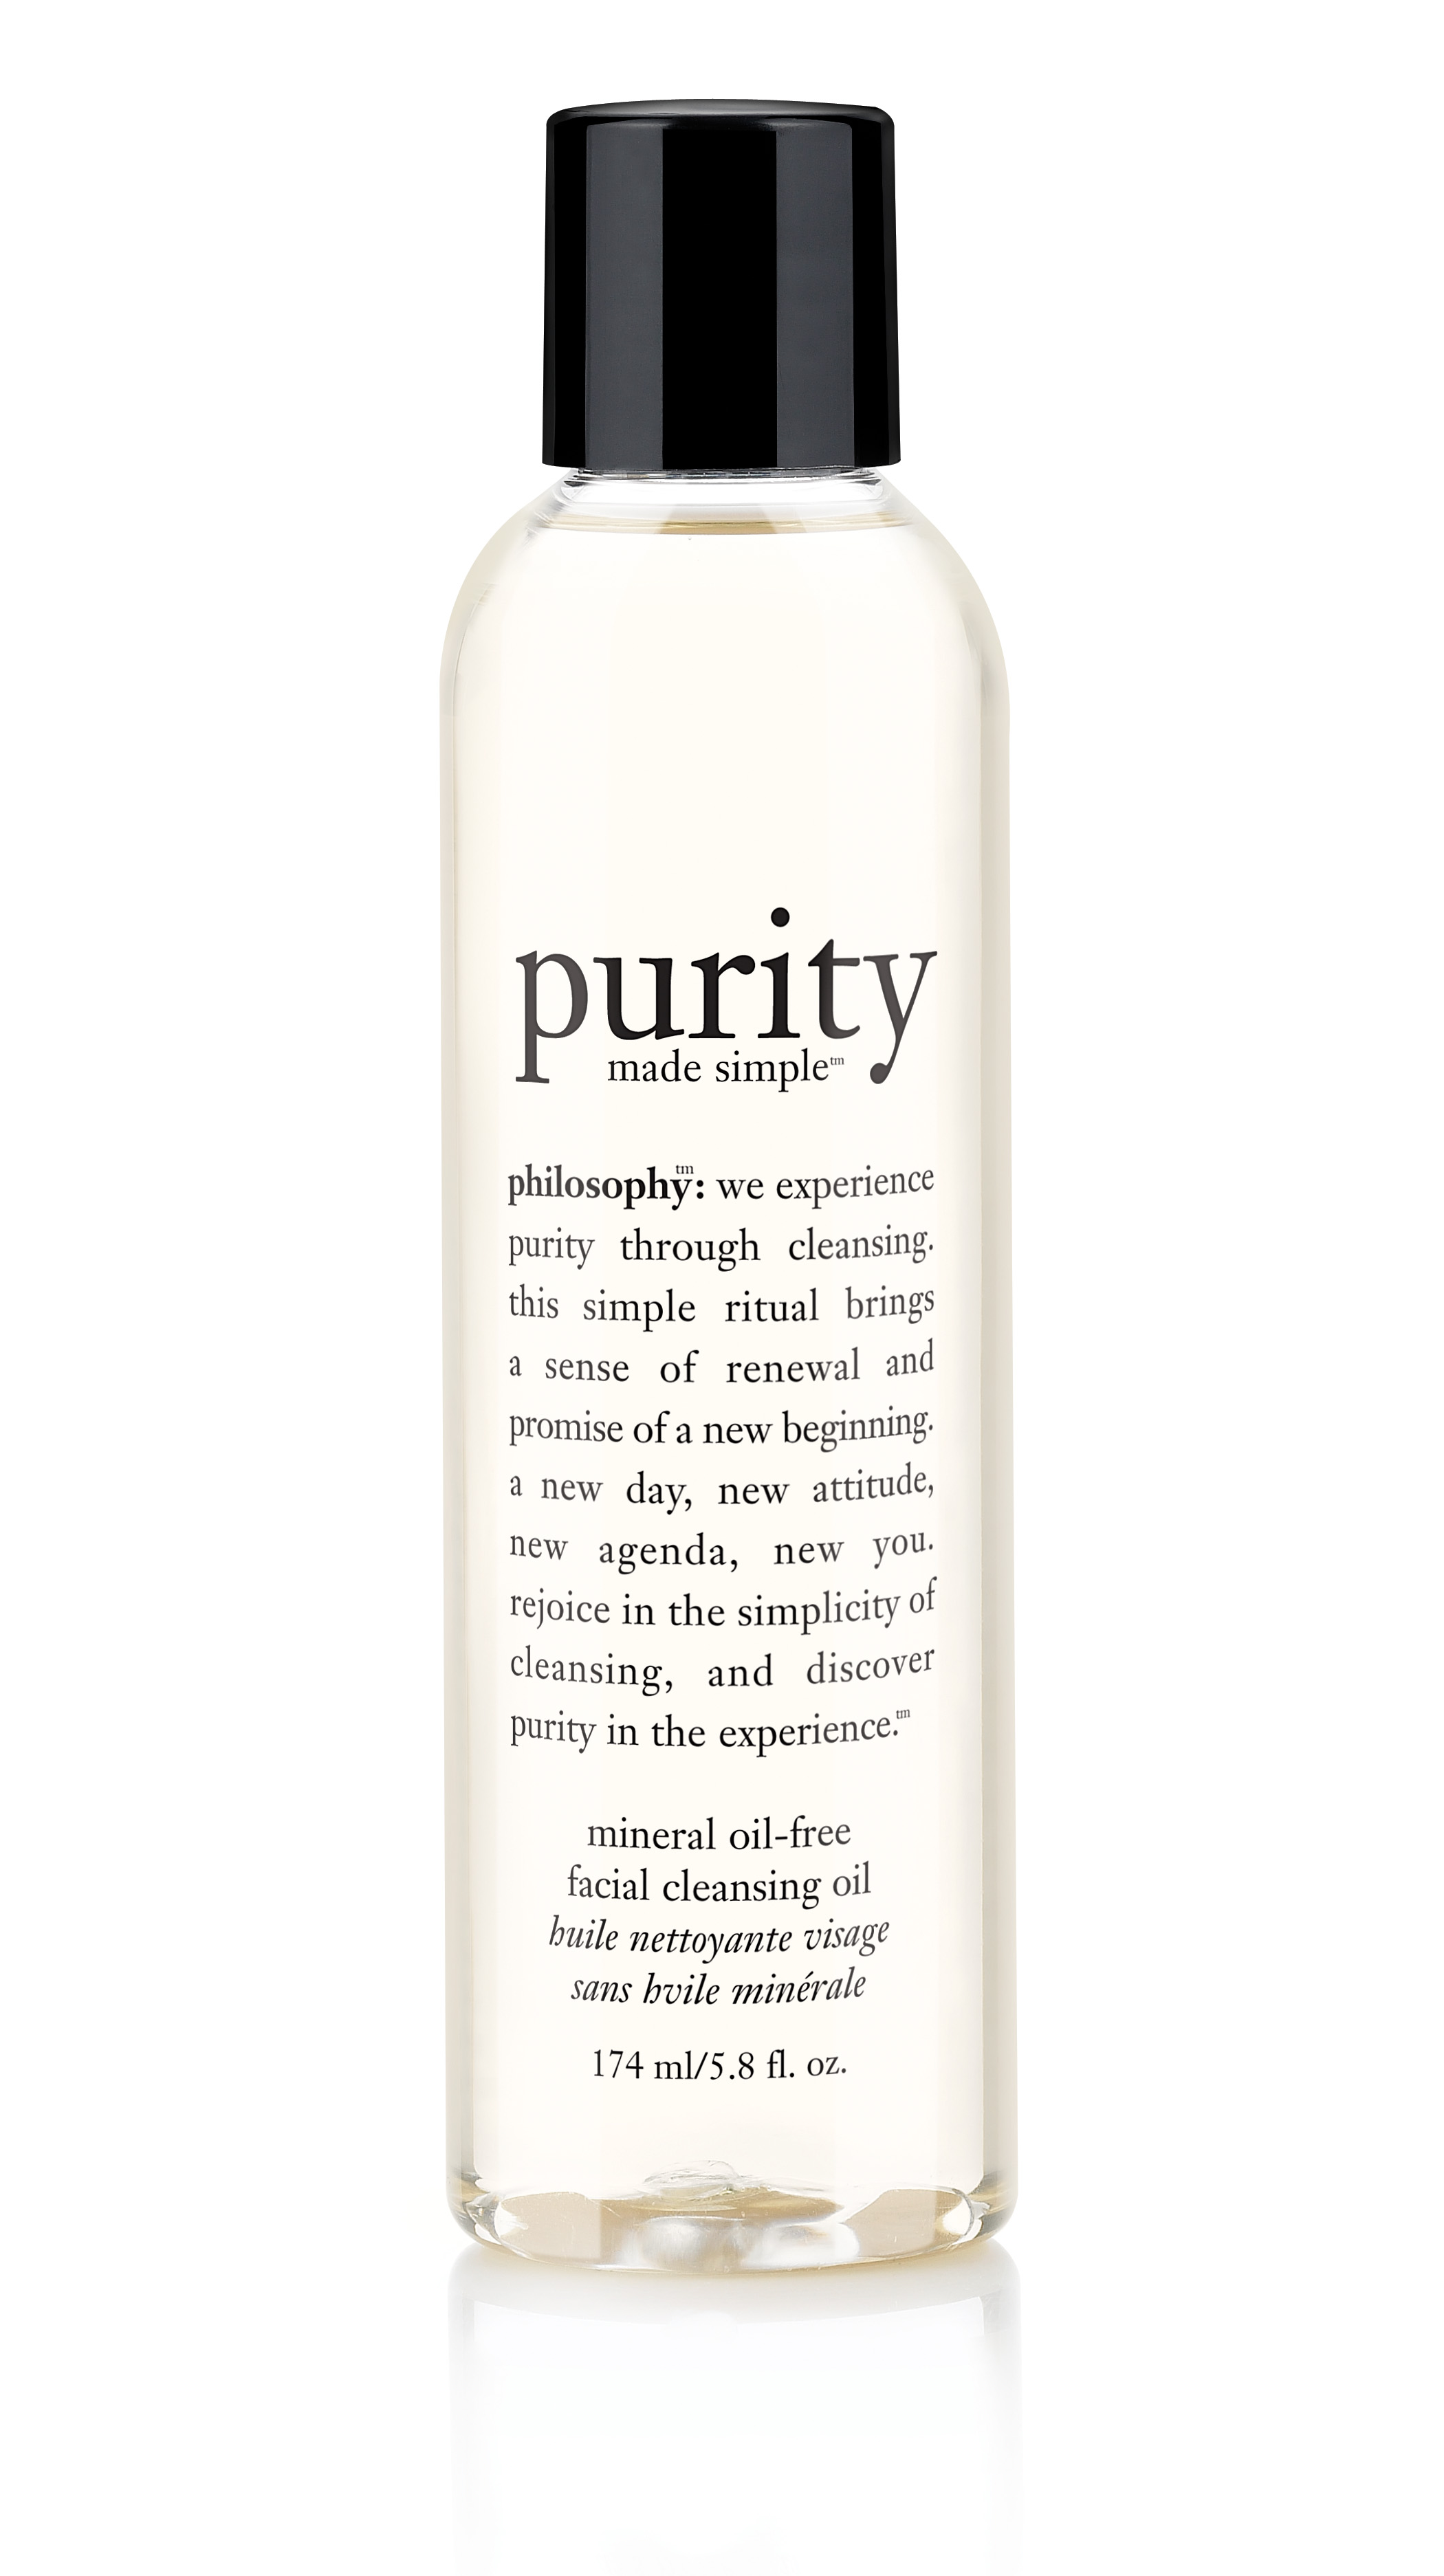 purity mineral oil-free facial cleansing oil